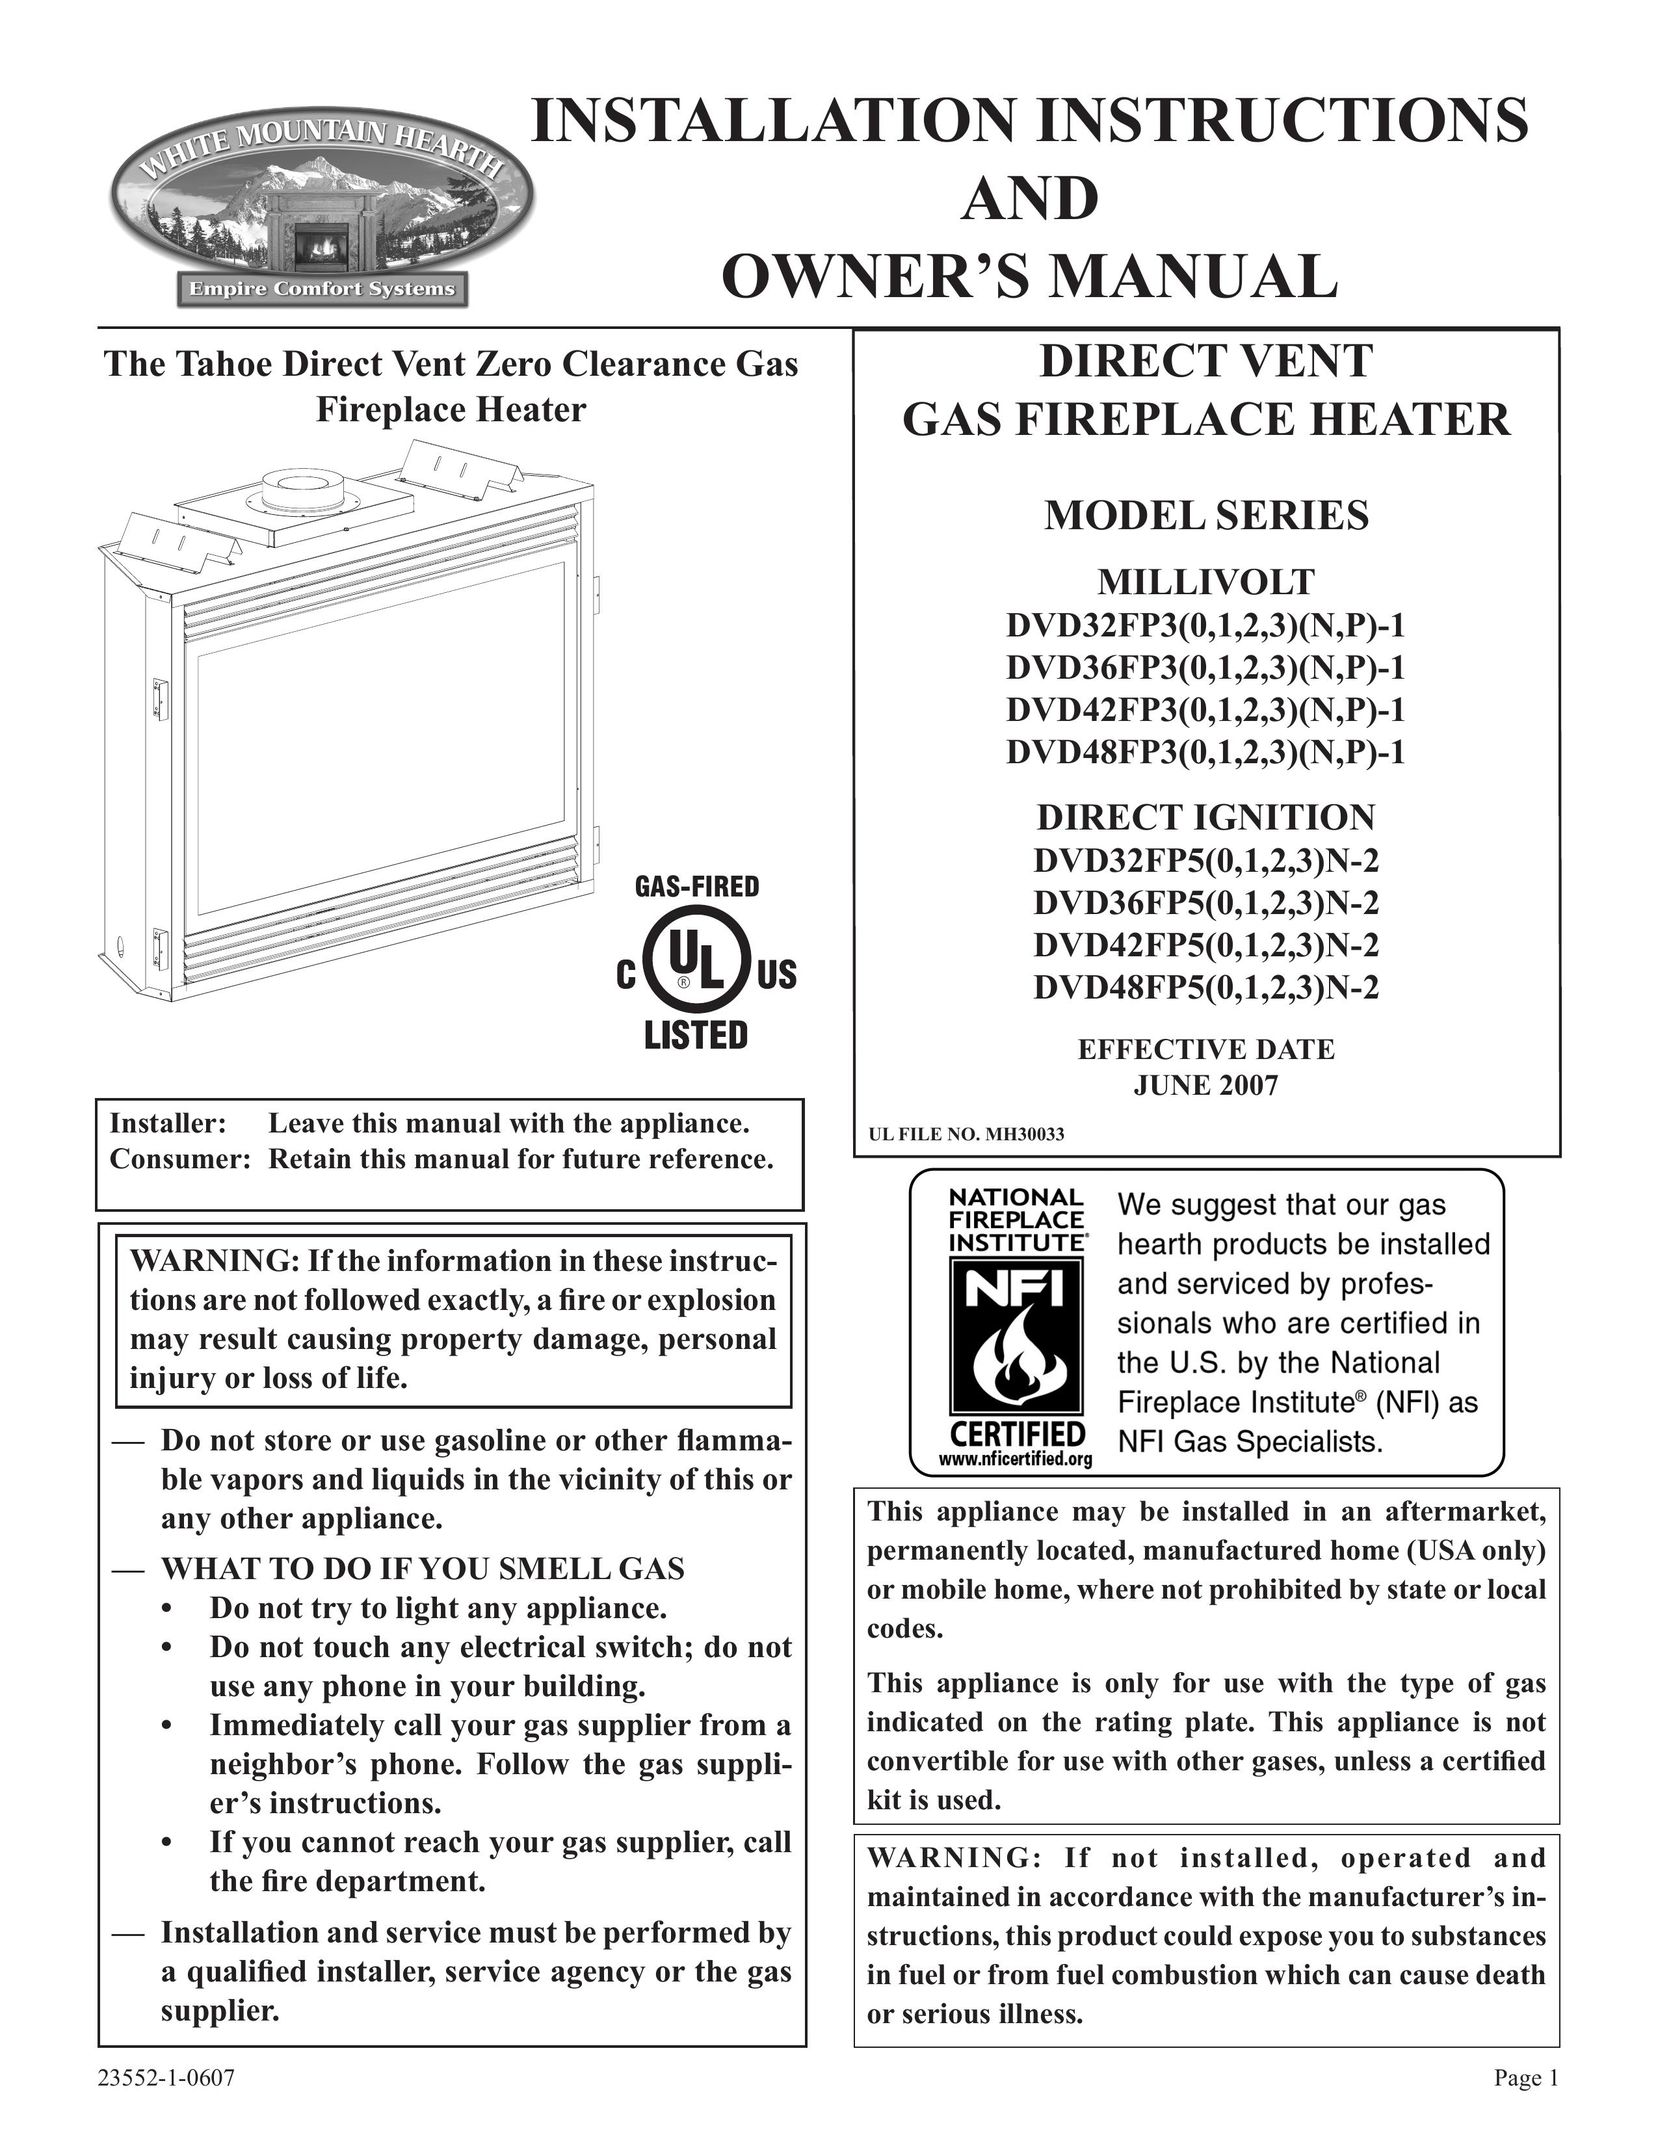 Empire Comfort Systems DVD36FP3 Indoor Fireplace User Manual